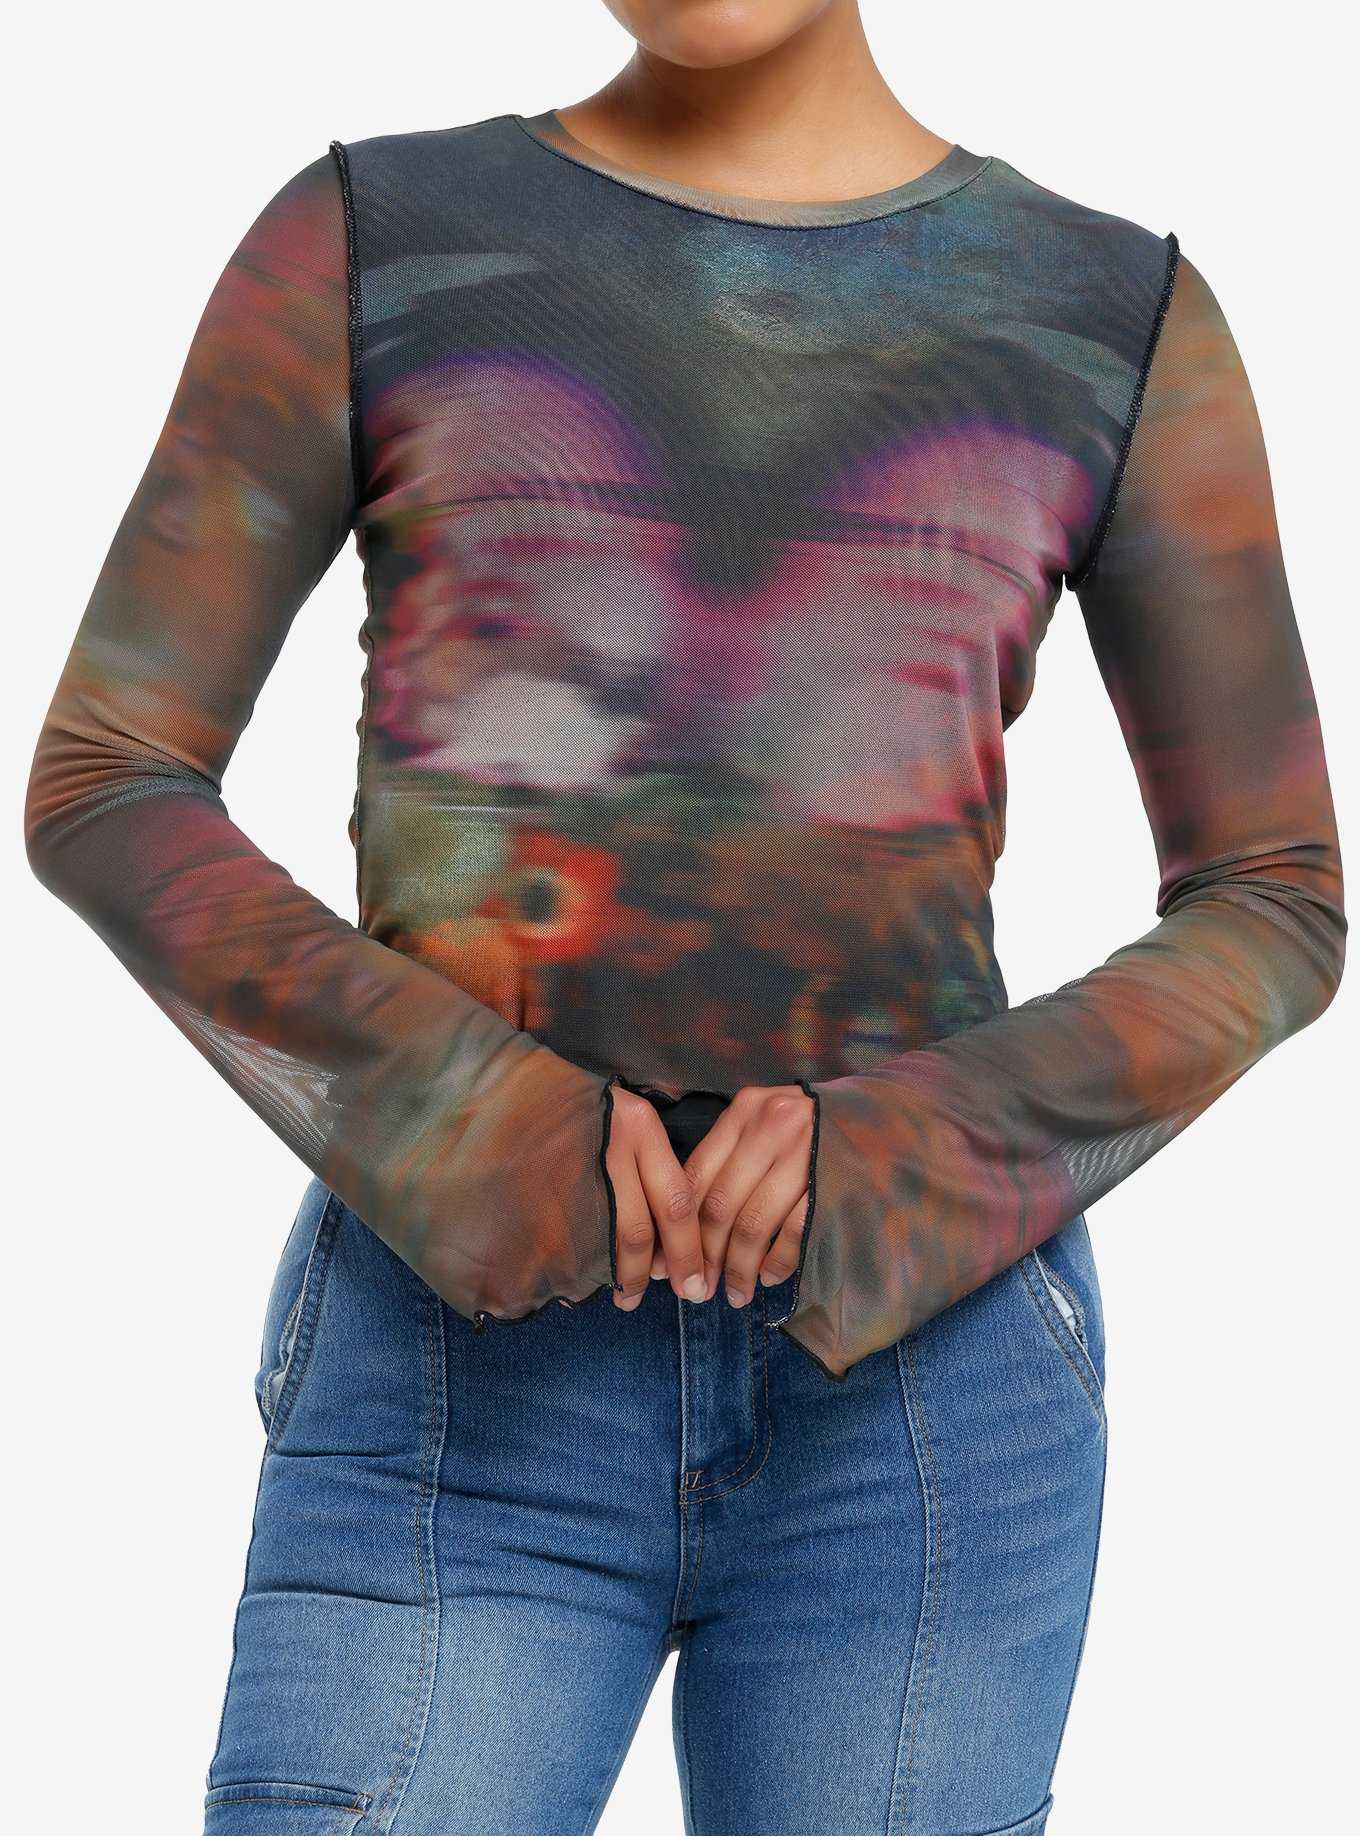 Thorn & Fable Blurry Butterfly Mesh Girls Long-Sleeve Top, , hi-res